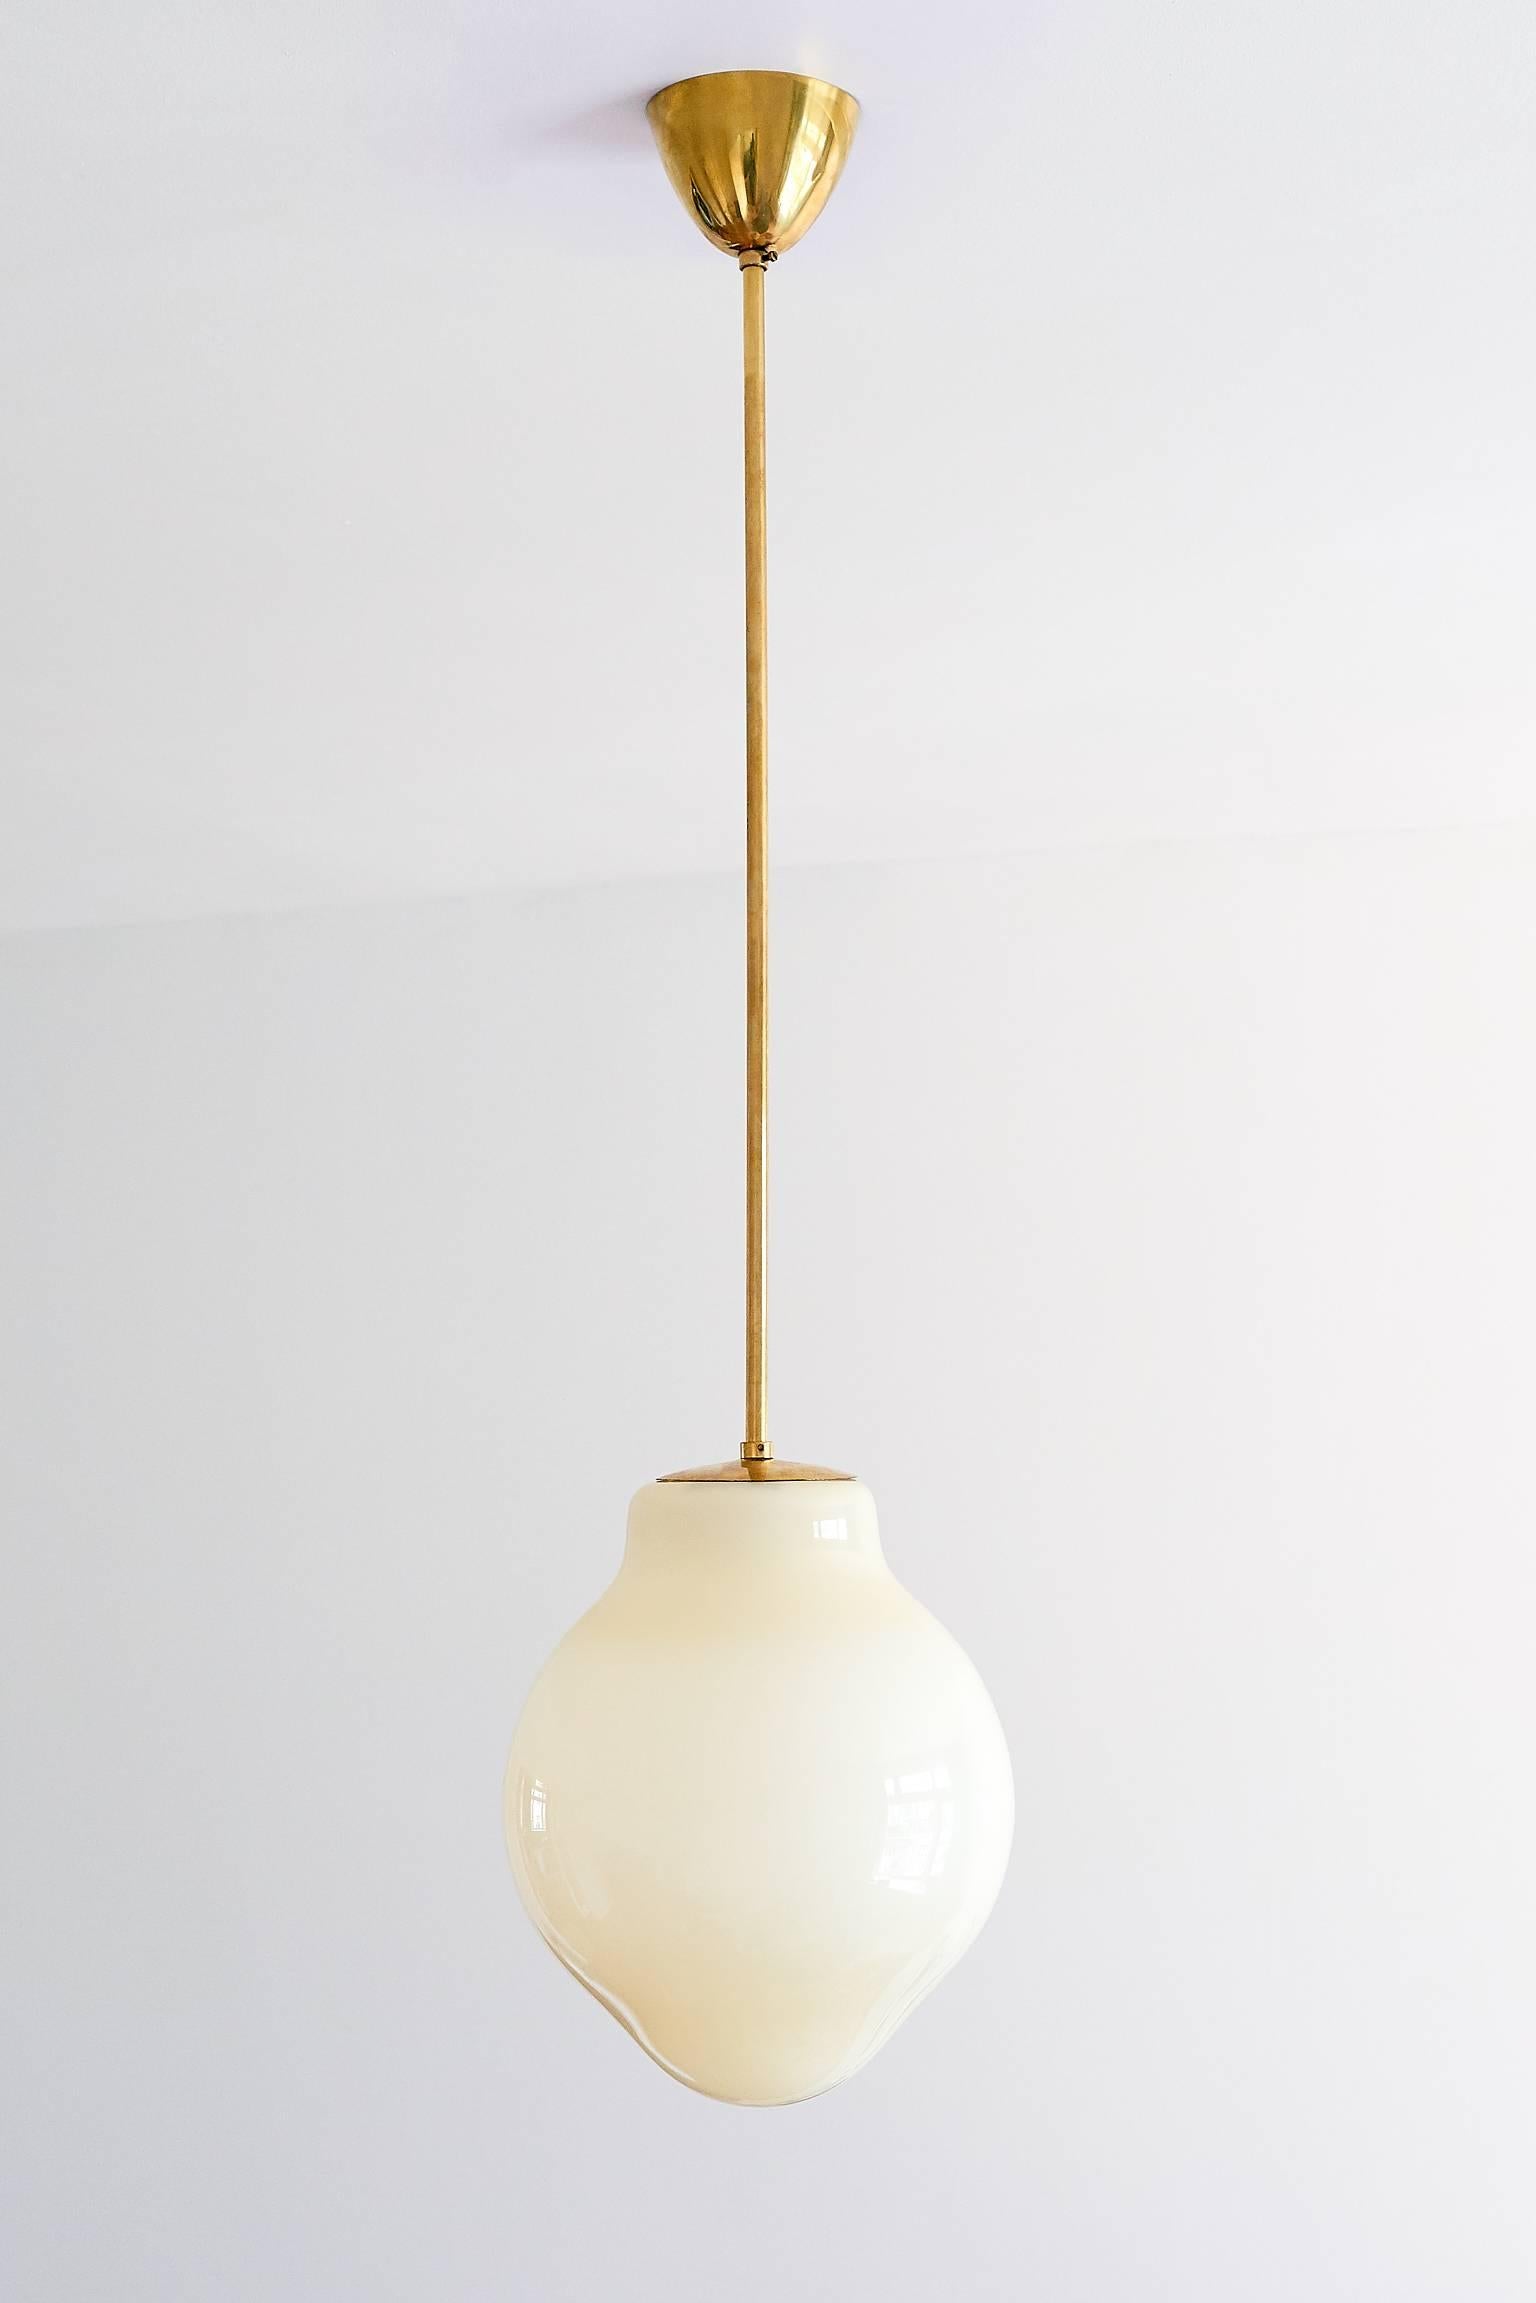 This rare pendant or ceiling lamp was designed by Paavo Tynell and produced by Taito Oy in the early 1950s. The model number is 1092 and the lamp is marked with Taito. The handblown yellow glass shades provide a gentle and warm light distribution.